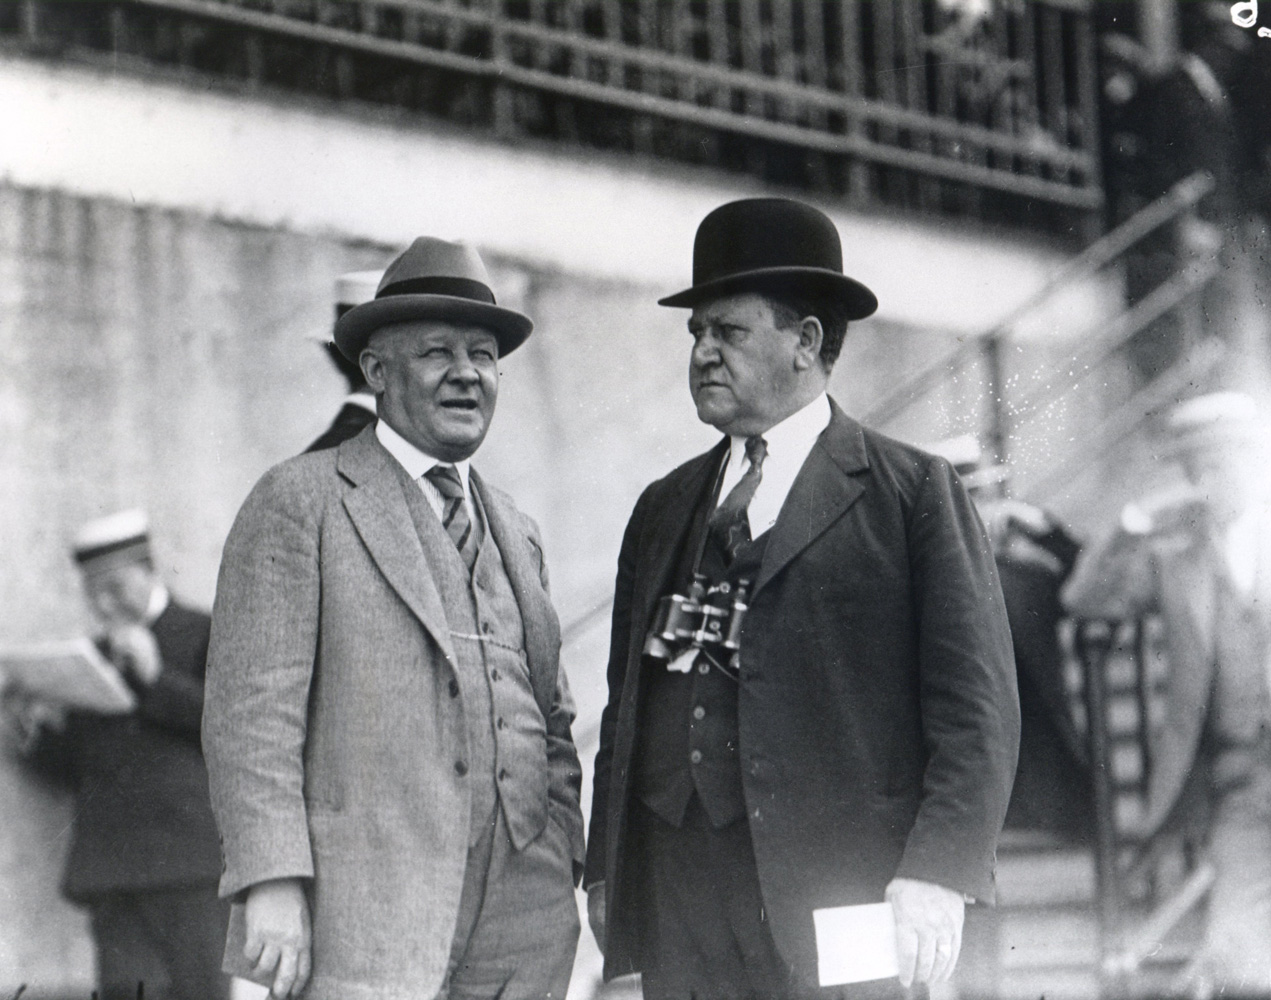 Fred Burlew (on right) with an unidentified man (Keeneland Library Cook Collection/Museum Collection)